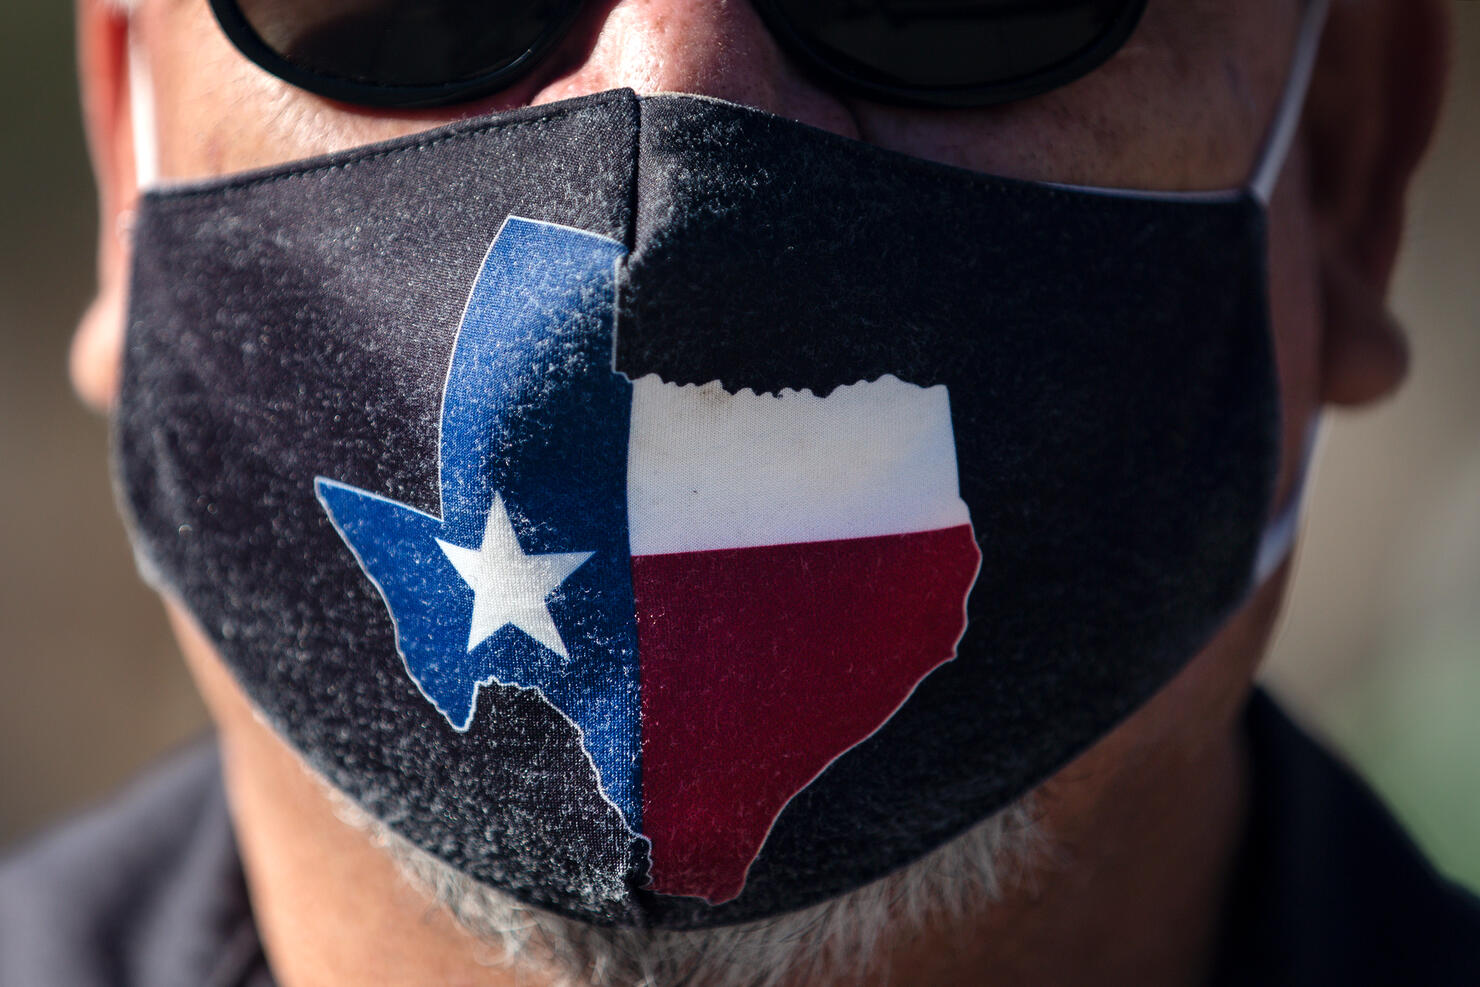 Texas Governor Abbott Lifts Statewide Mask Mandate